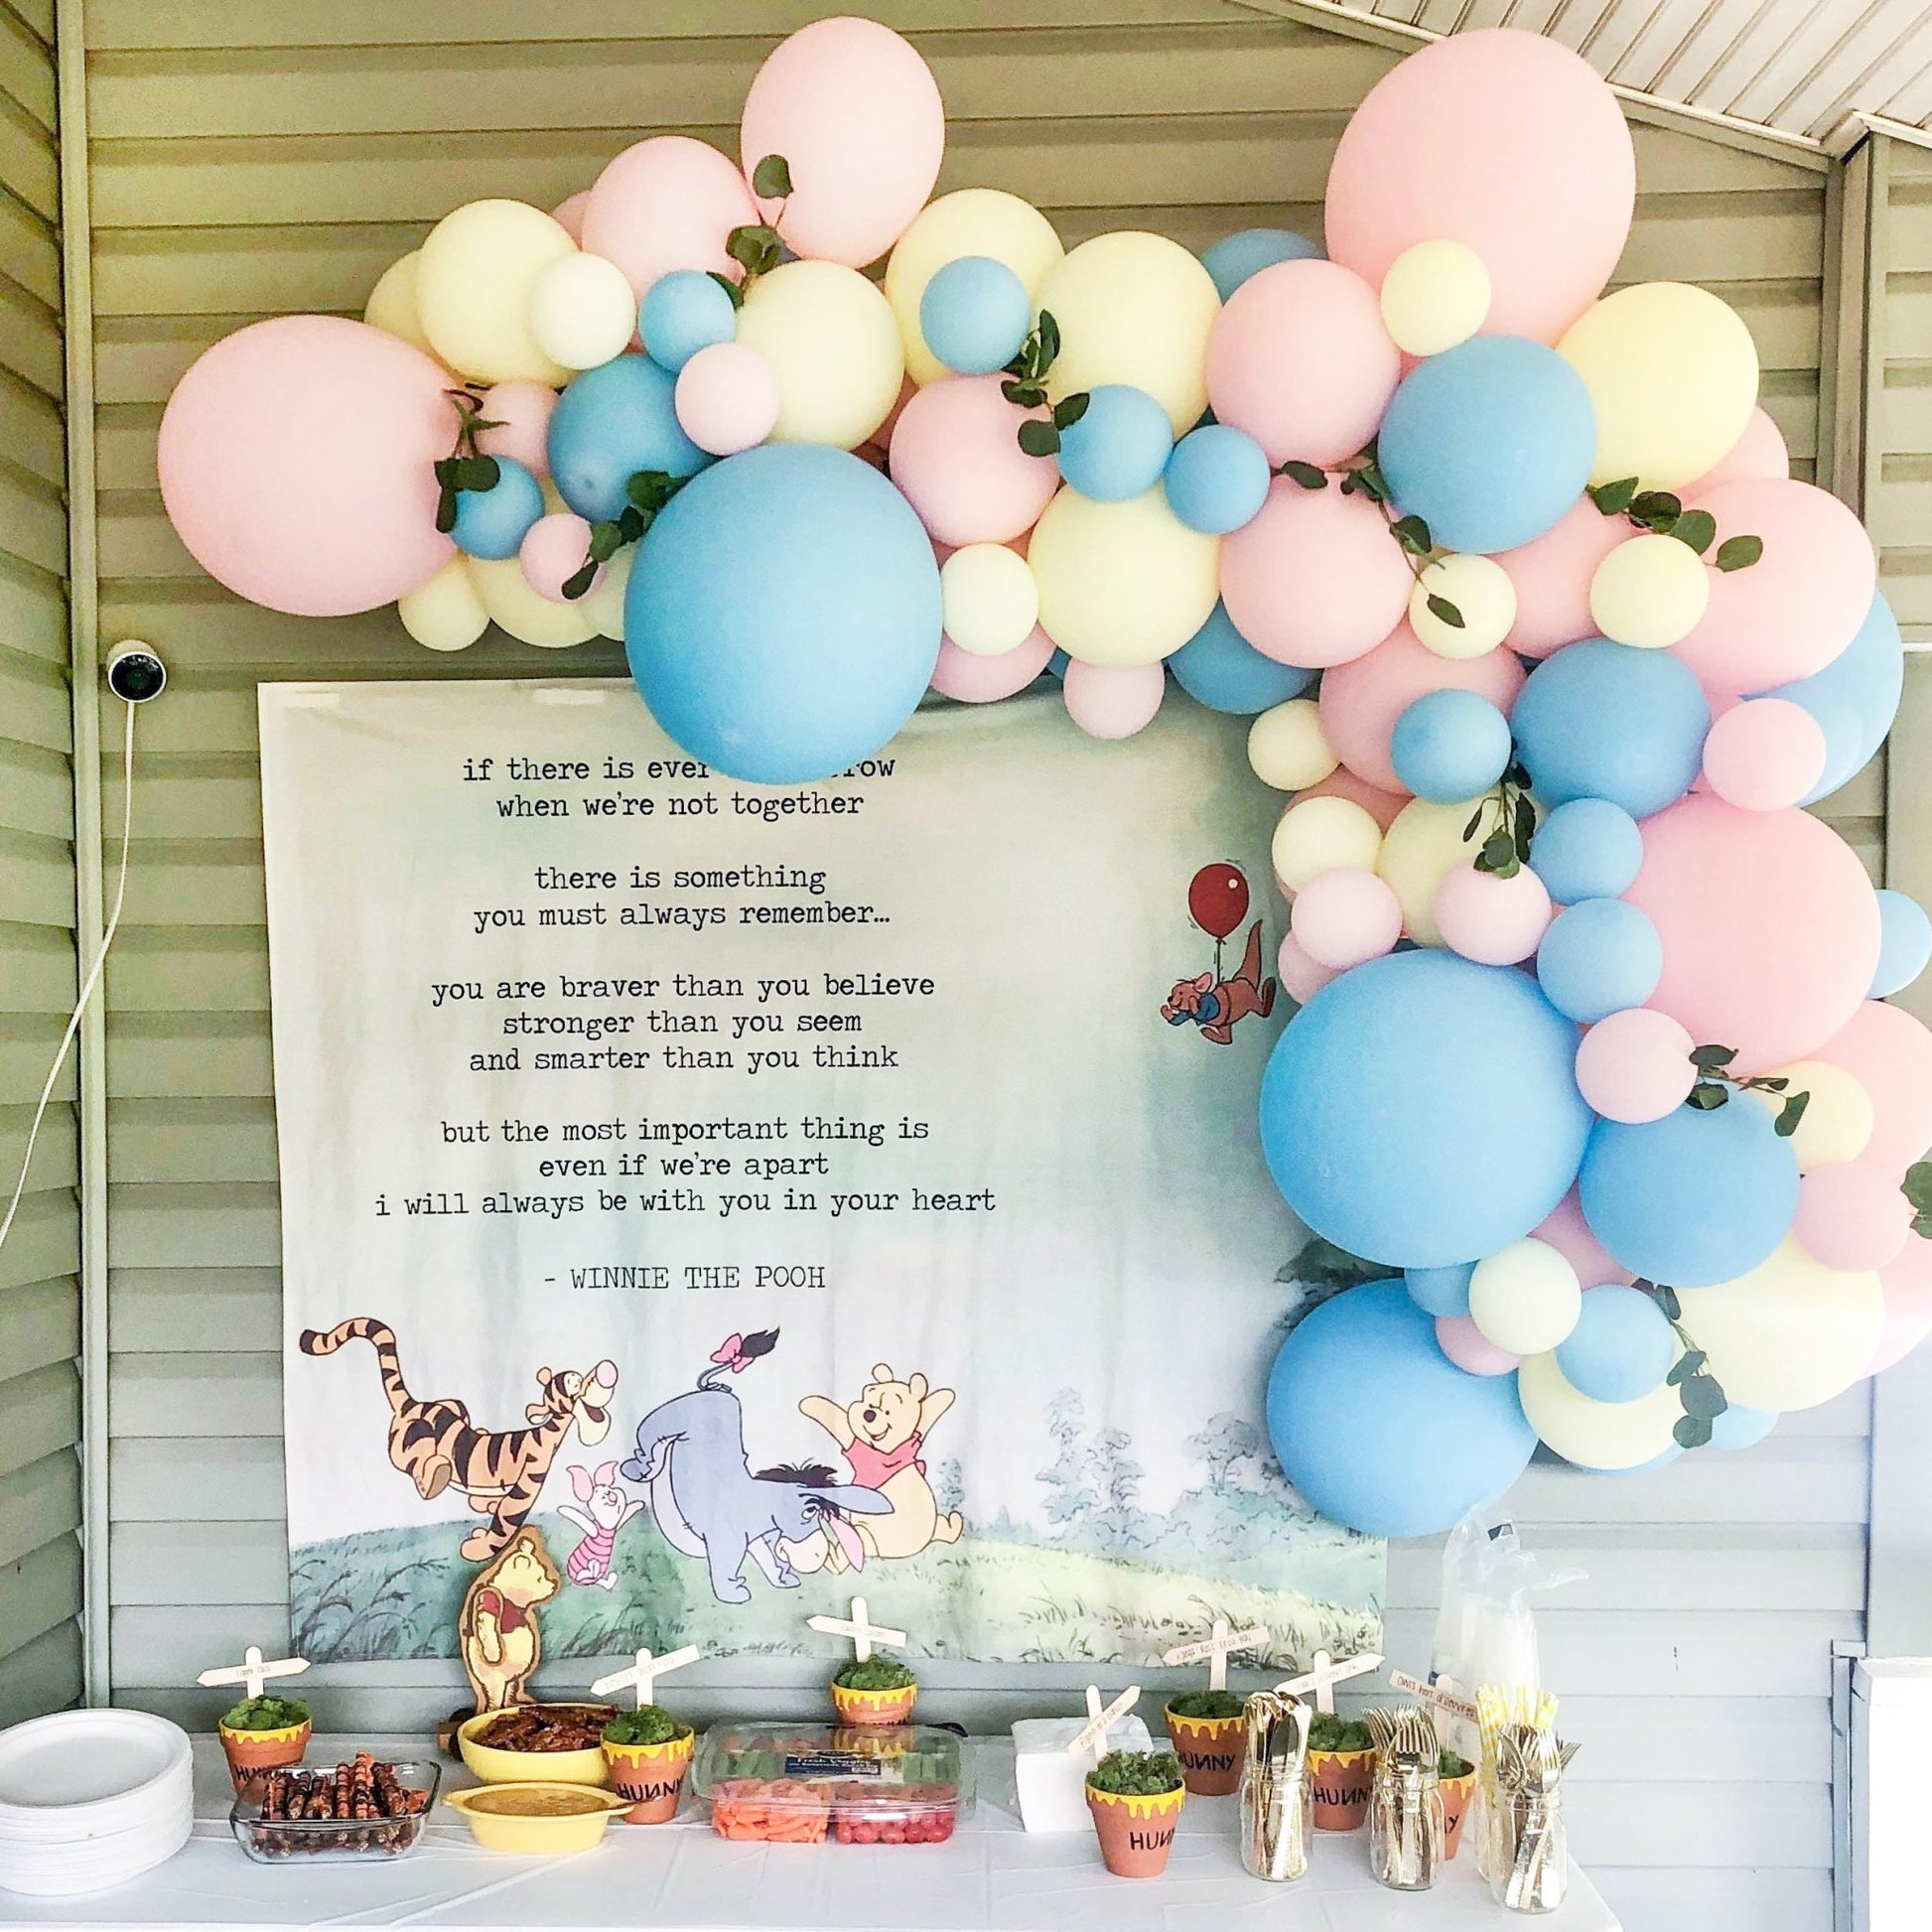 Gender Reveal Classic Pooh Balloon Arch - Balloon Garland Kit - Ellie's Party Supply